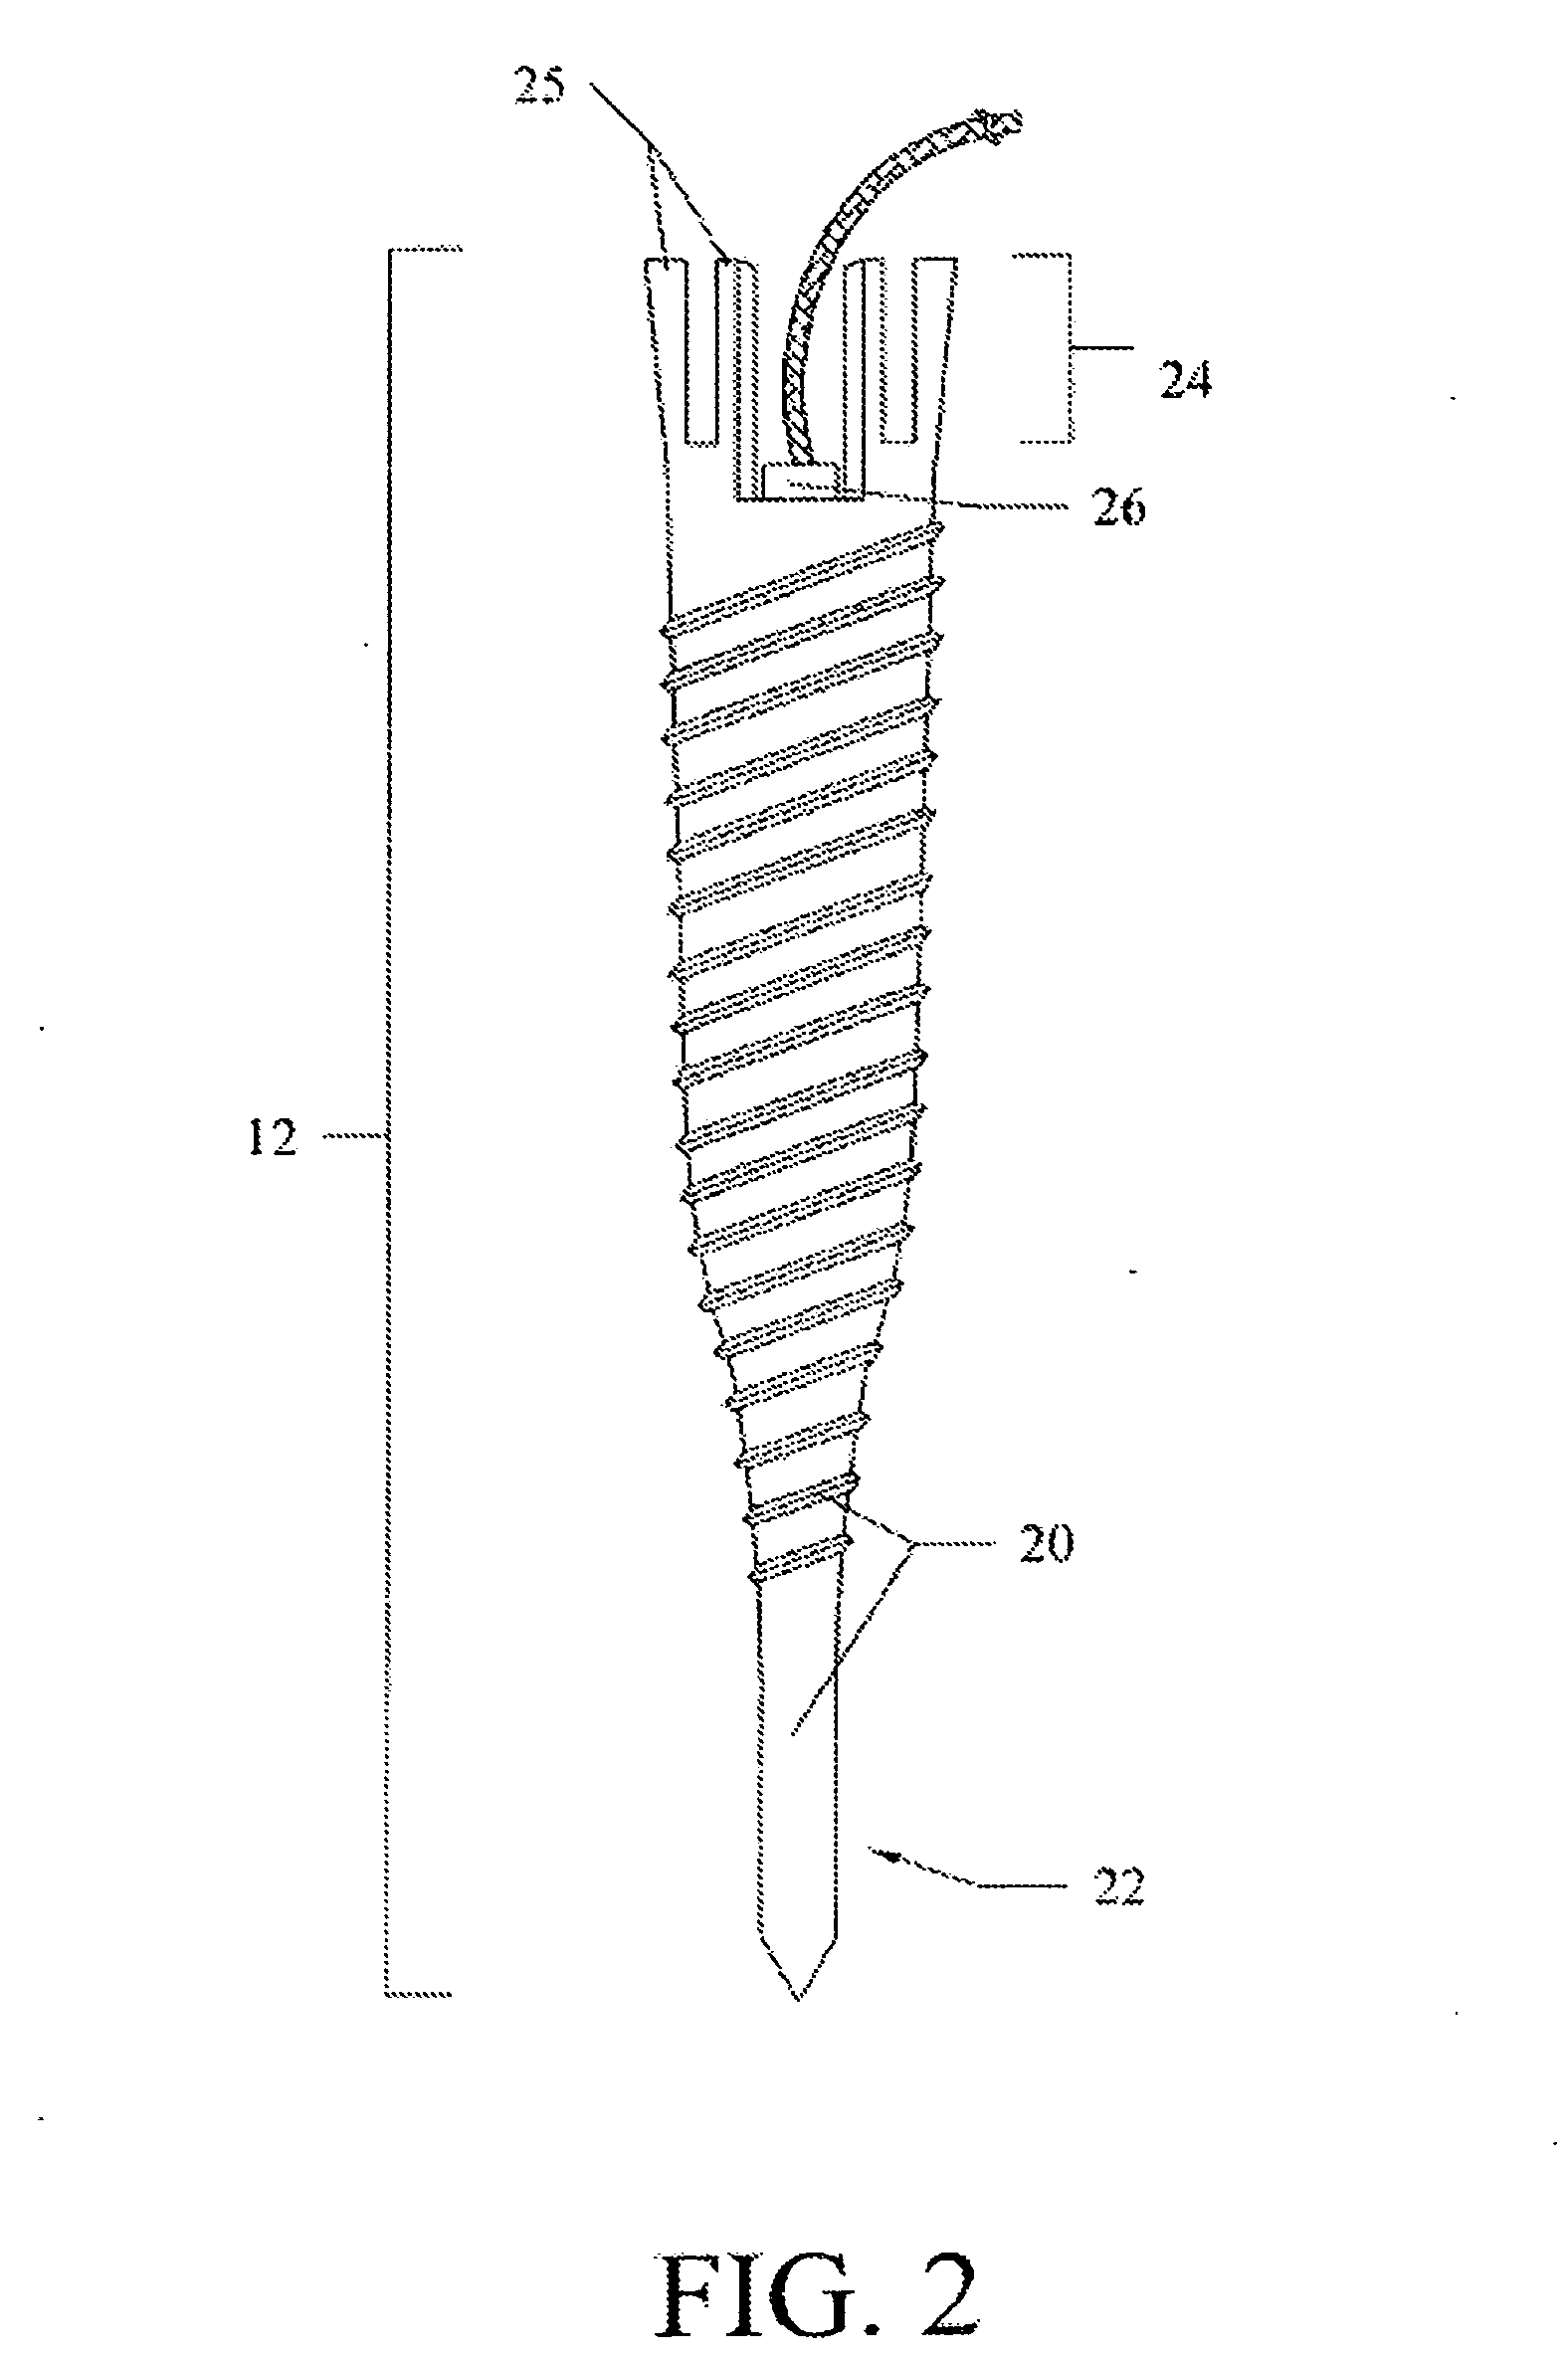 System and Method for Pedicle Screw Placement in Vertebral Alignment